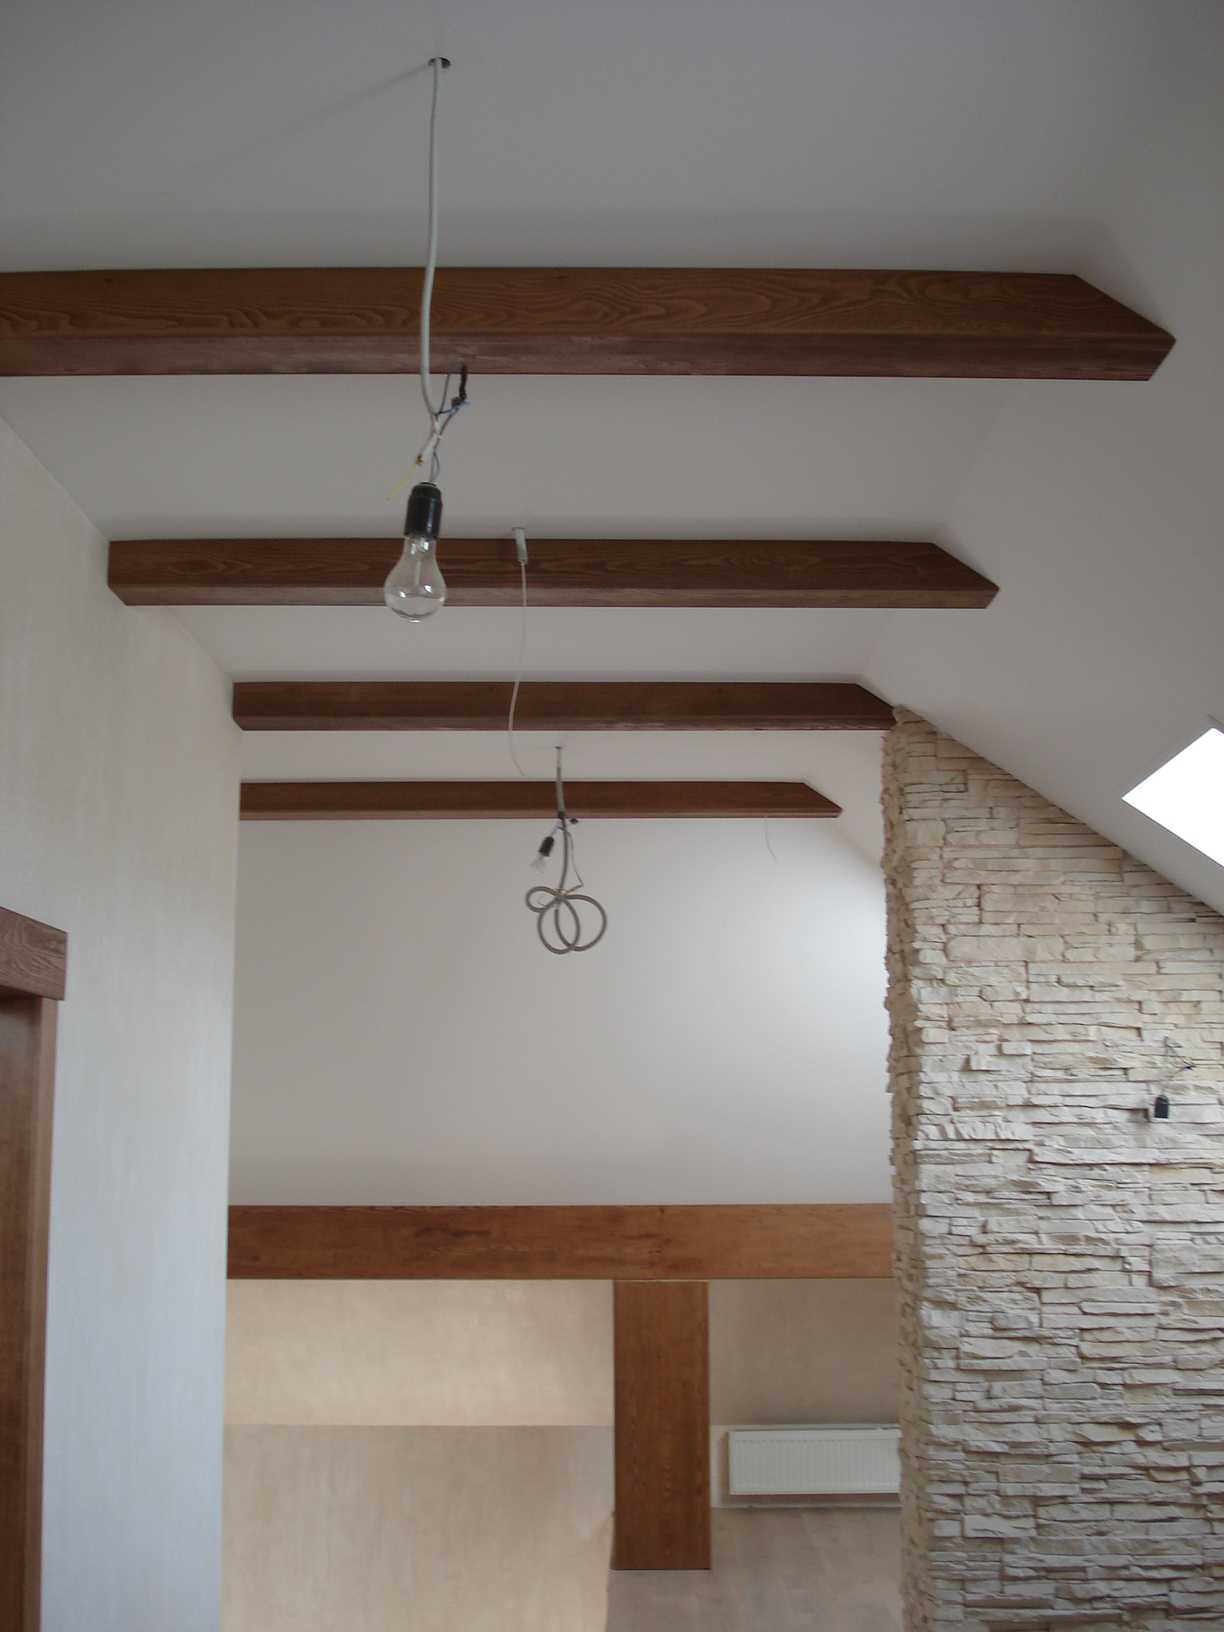 variant of a beautiful apartment decor with decorative beams